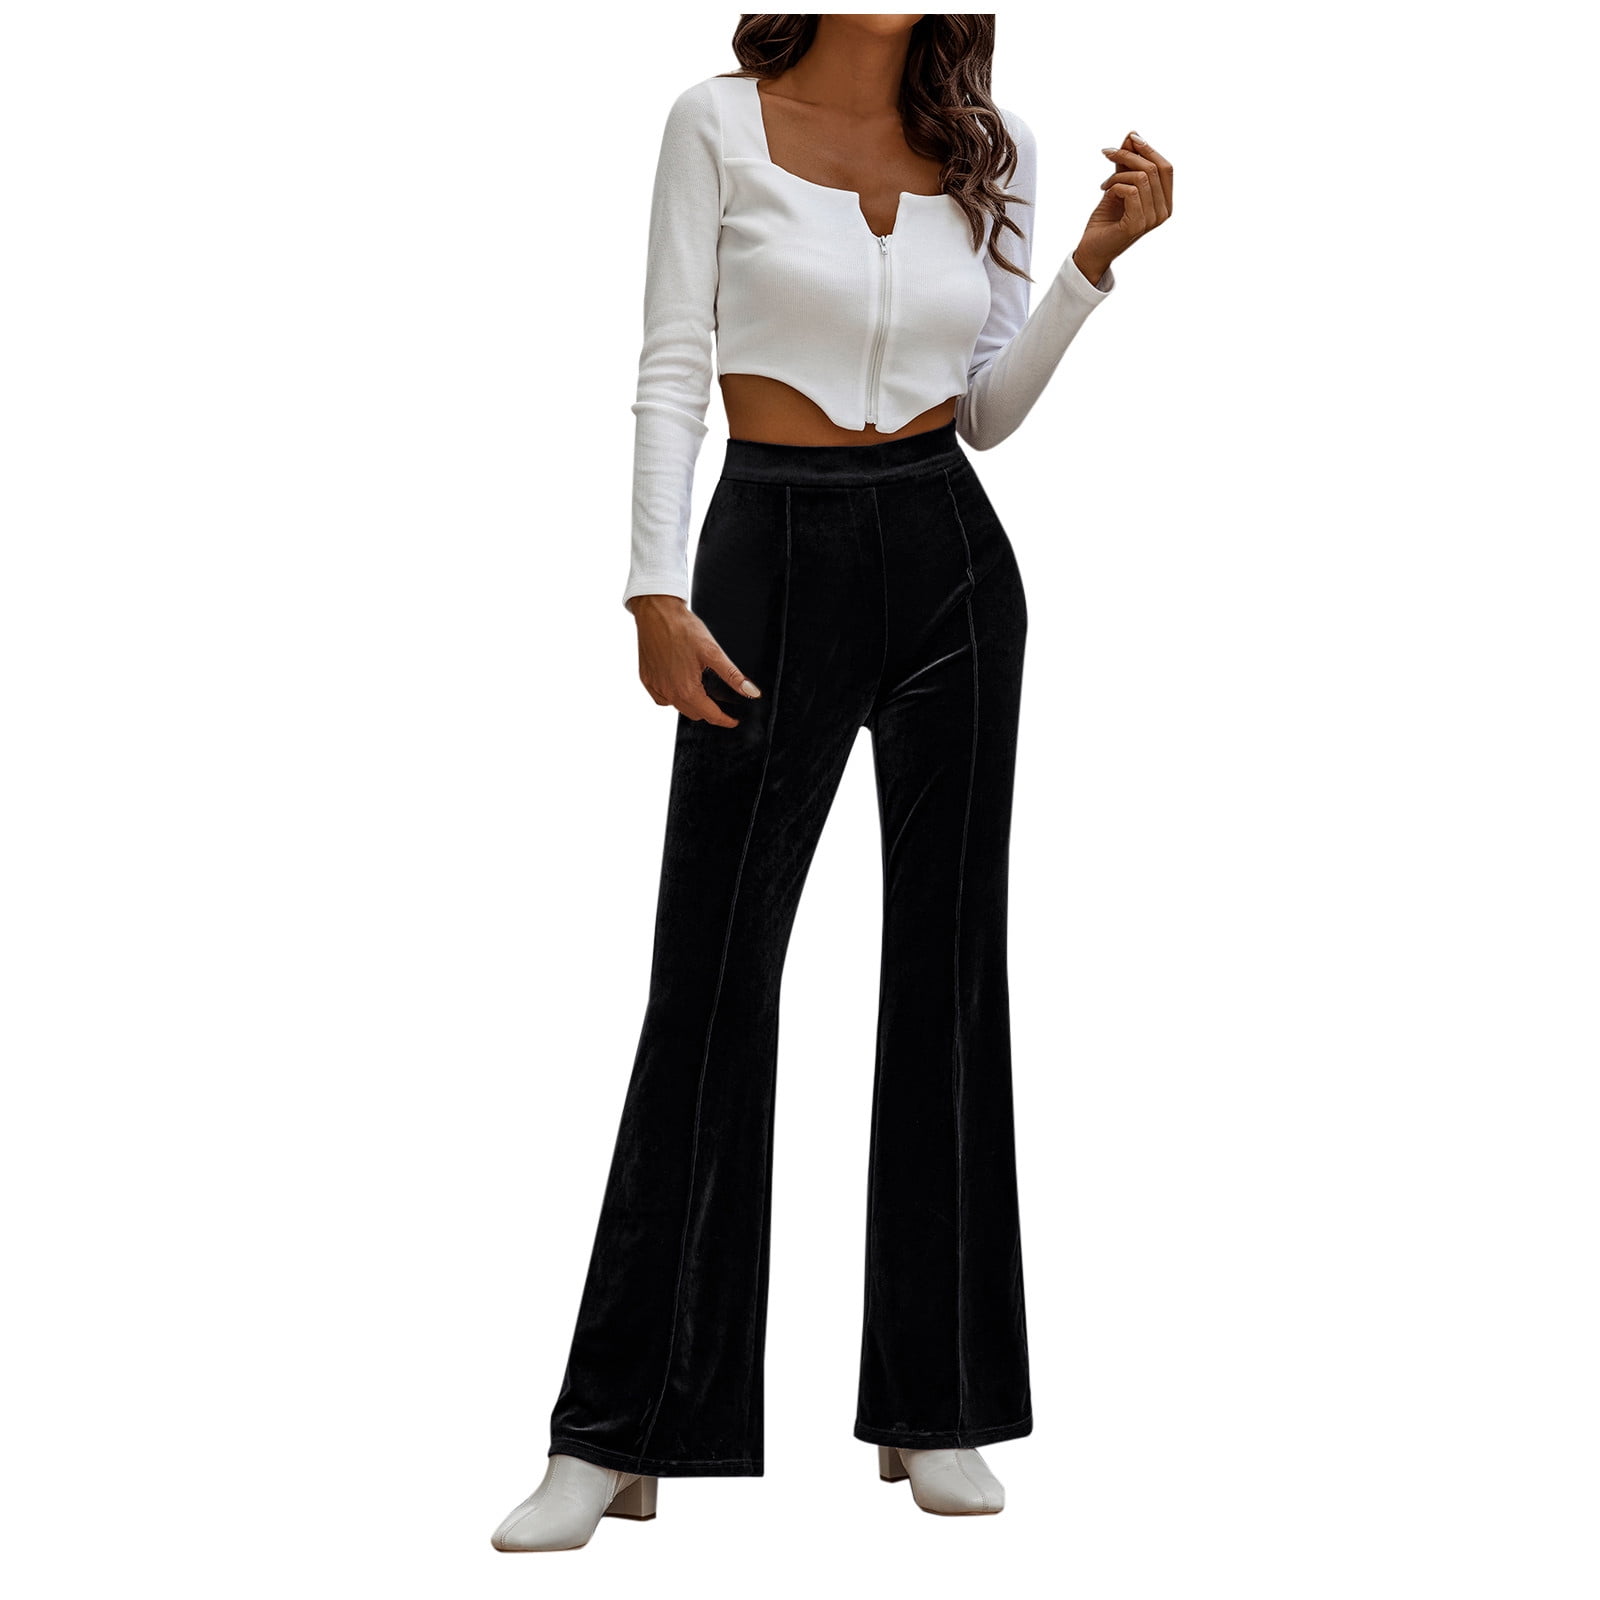 SOLID BLACK BELL BOTTOM PANTS FOR WOMEN at Rs 249 in Surat